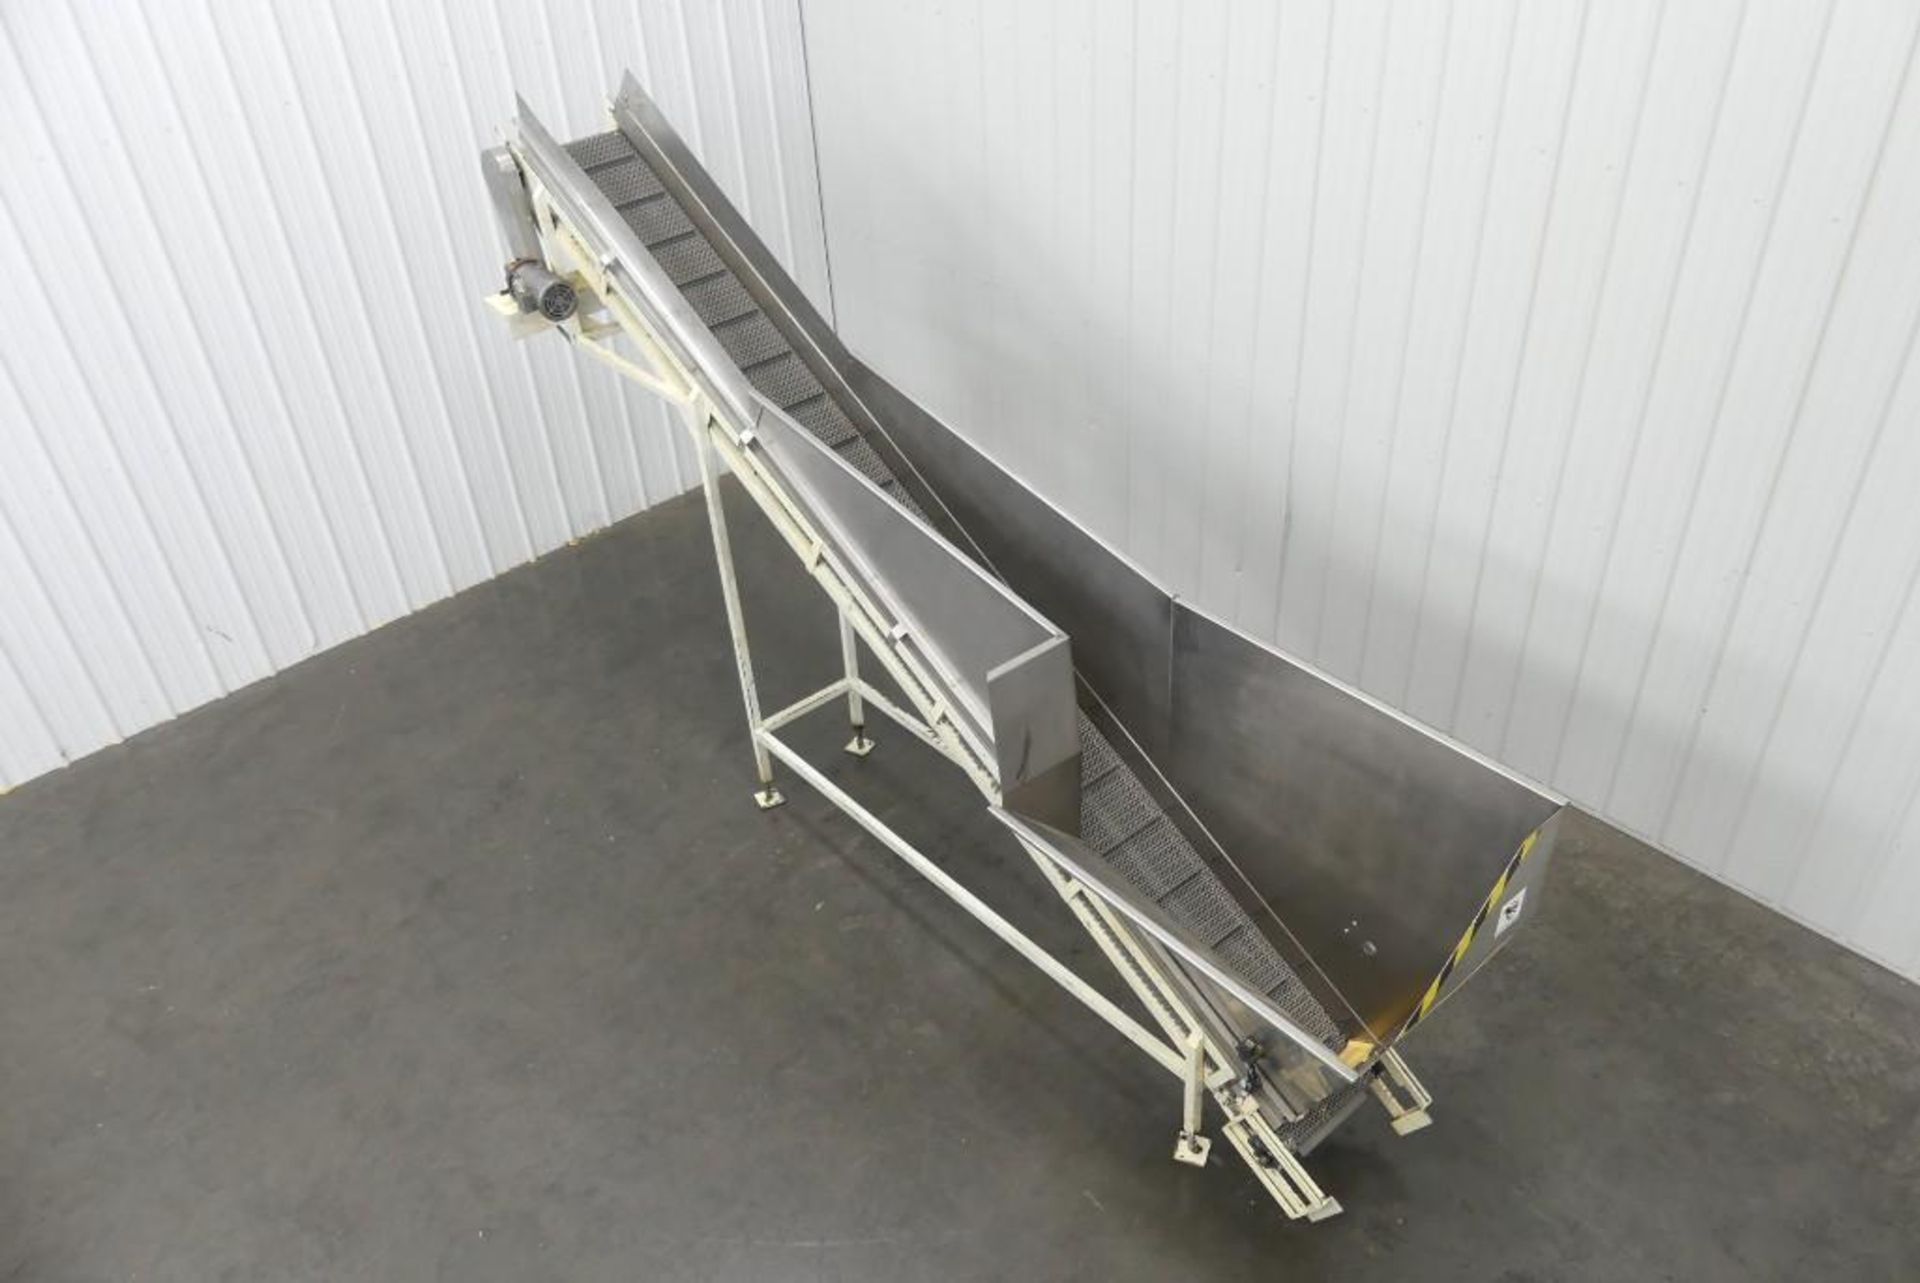 Cleated Incline Conveyor with Hopper 16" Wide - Image 4 of 7